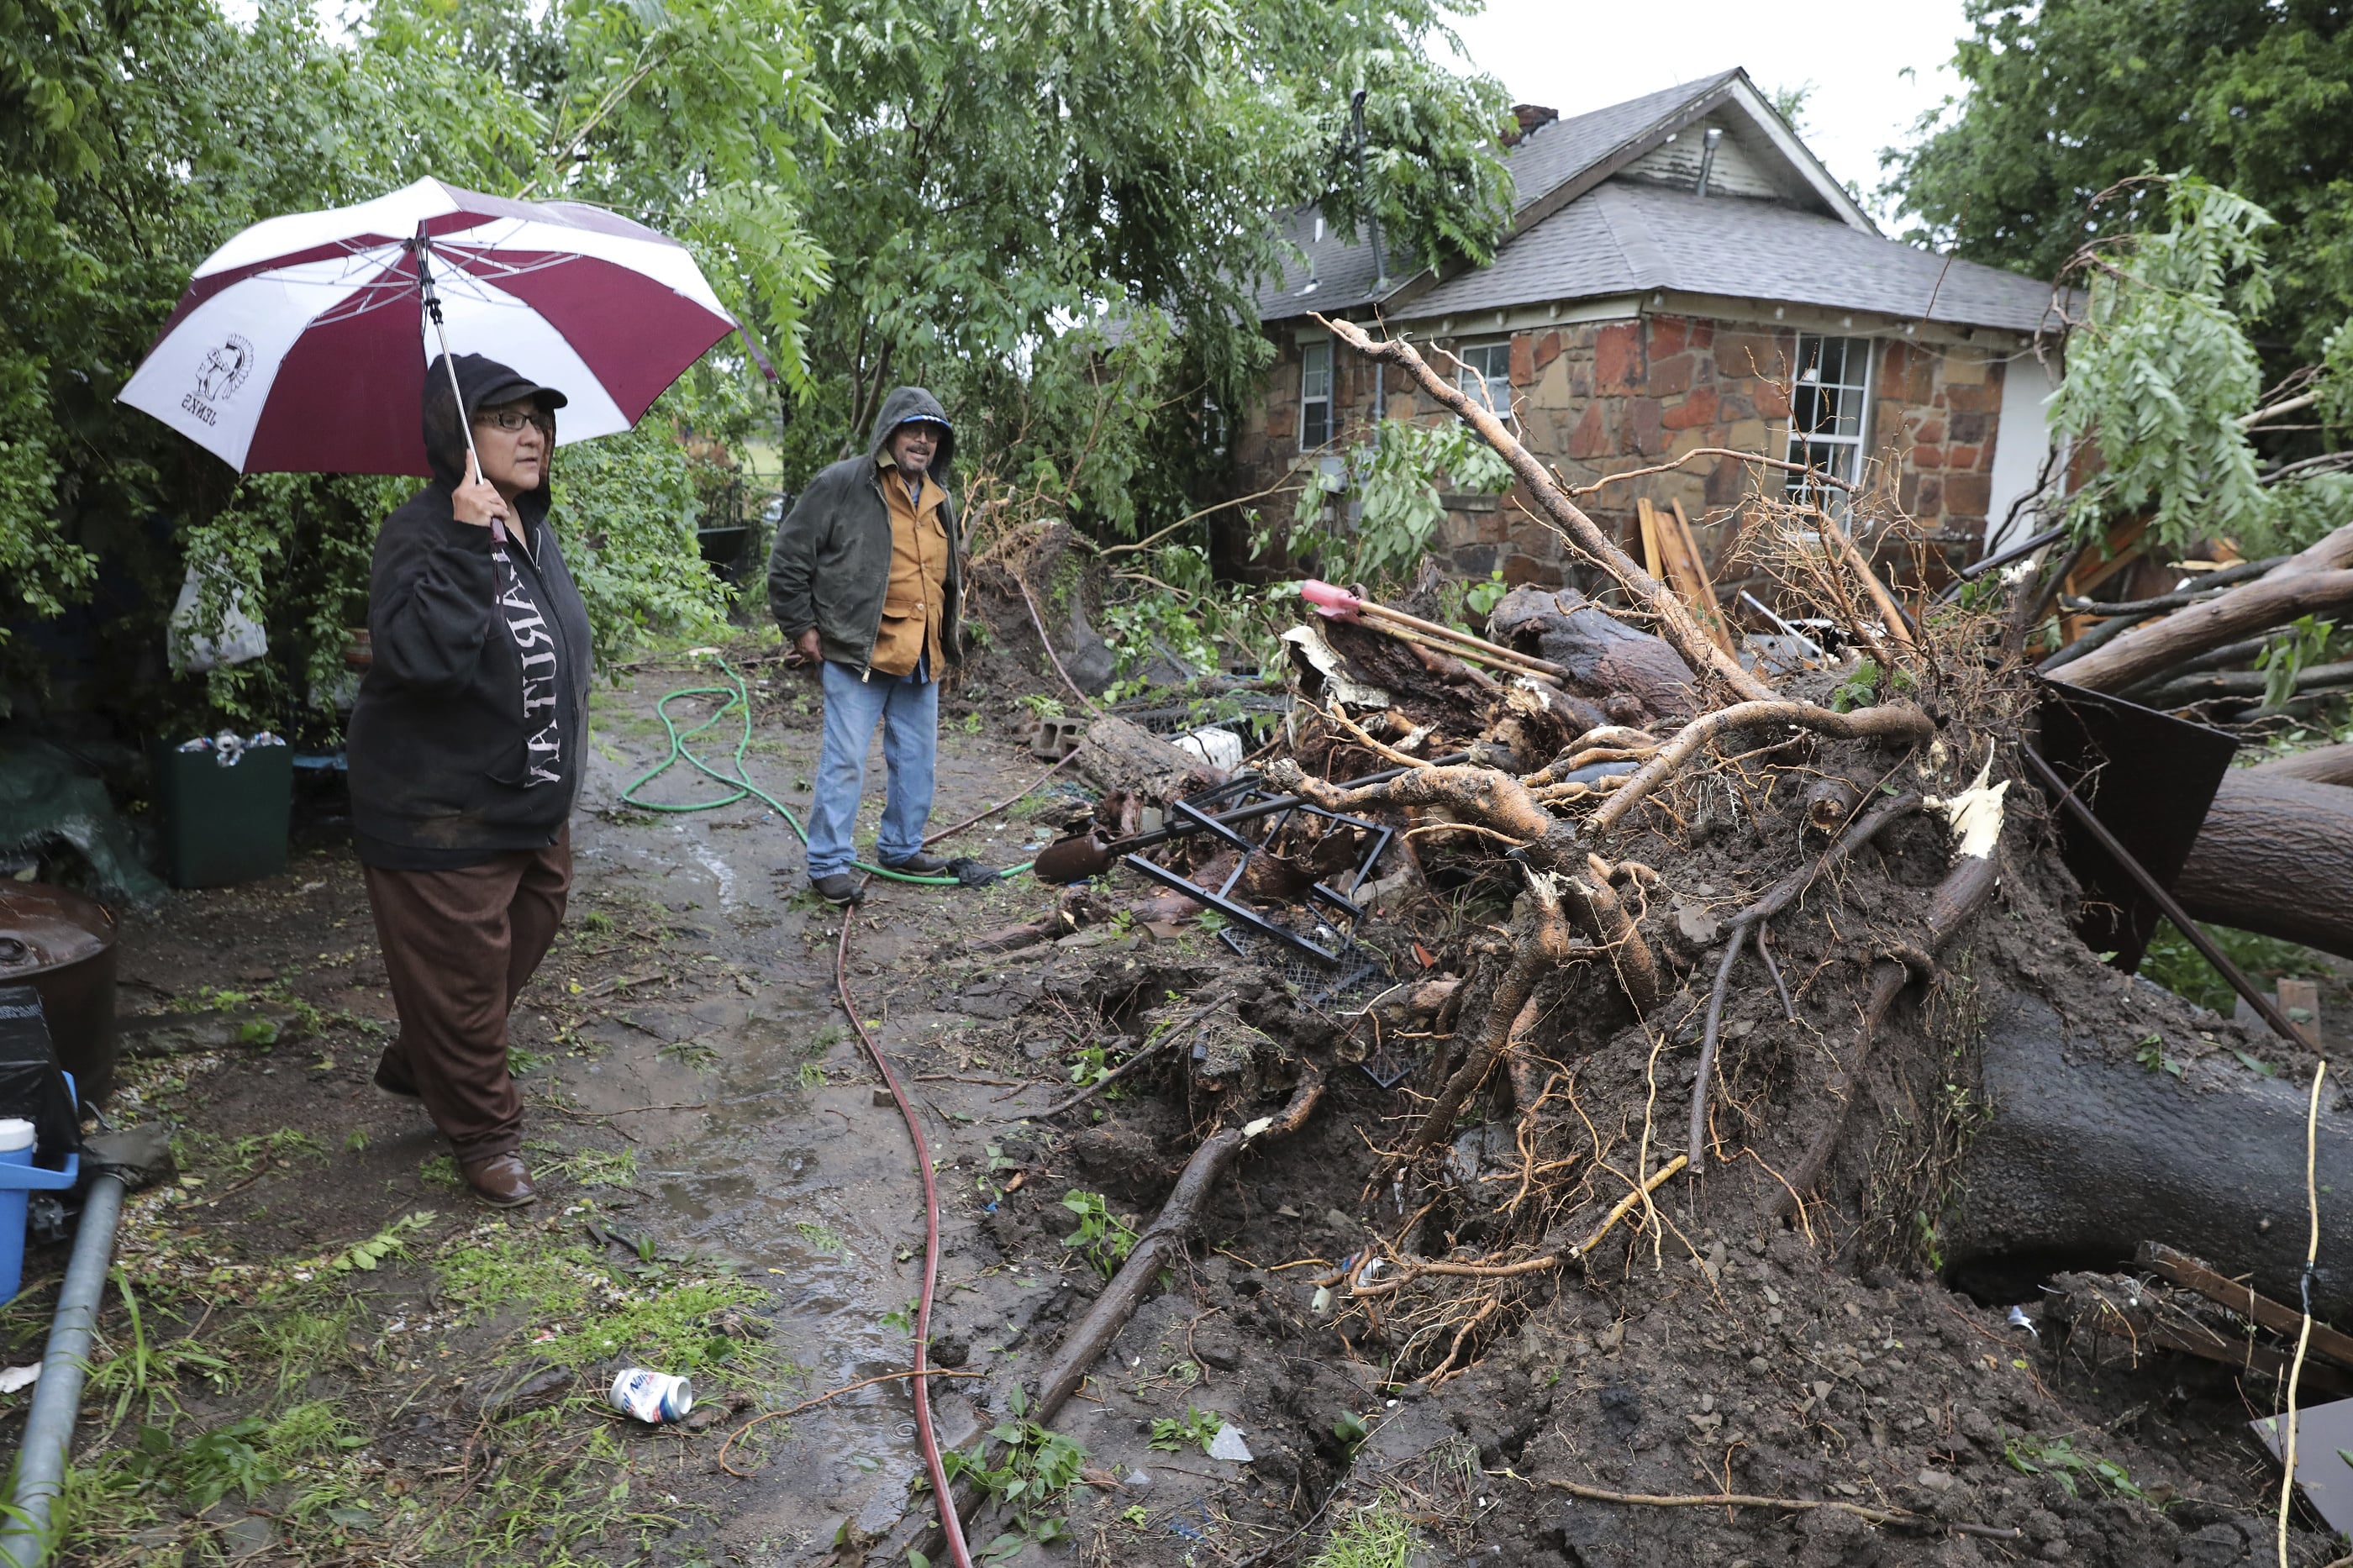 Carmen Perez and Jorge Torres survey storm damage of their home near Marshall and North Rockford in Tulsa on Tuesday, May 21, 2019. Their front door was blocked by a tree and they had to get out of their home through a front window.